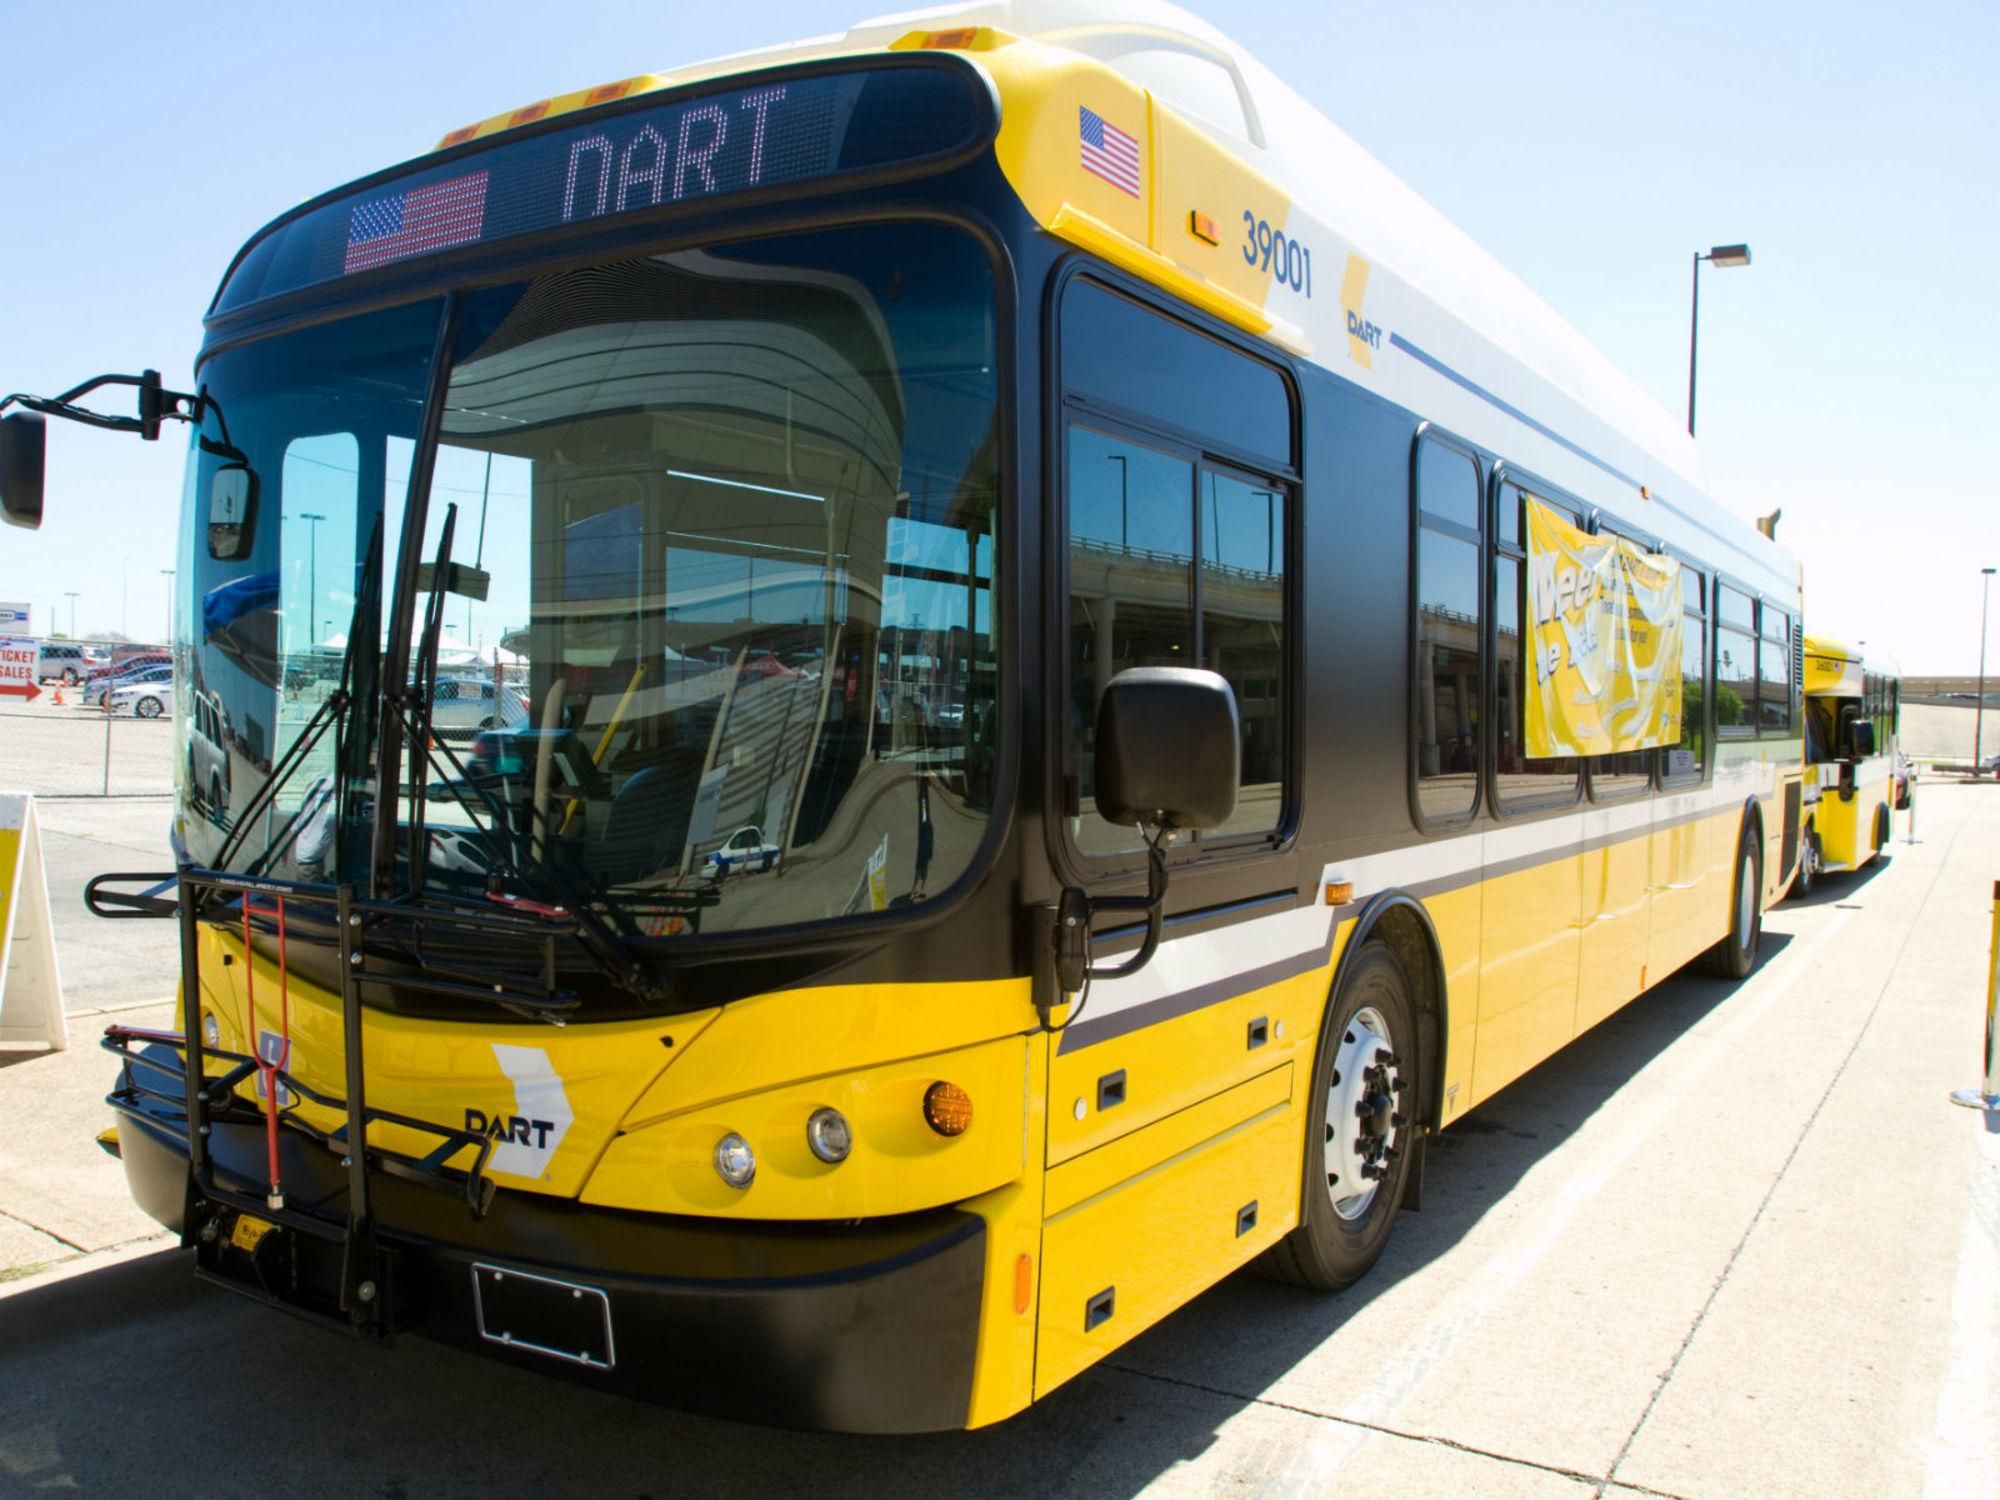 The DART bus situation will be changing in 2022.